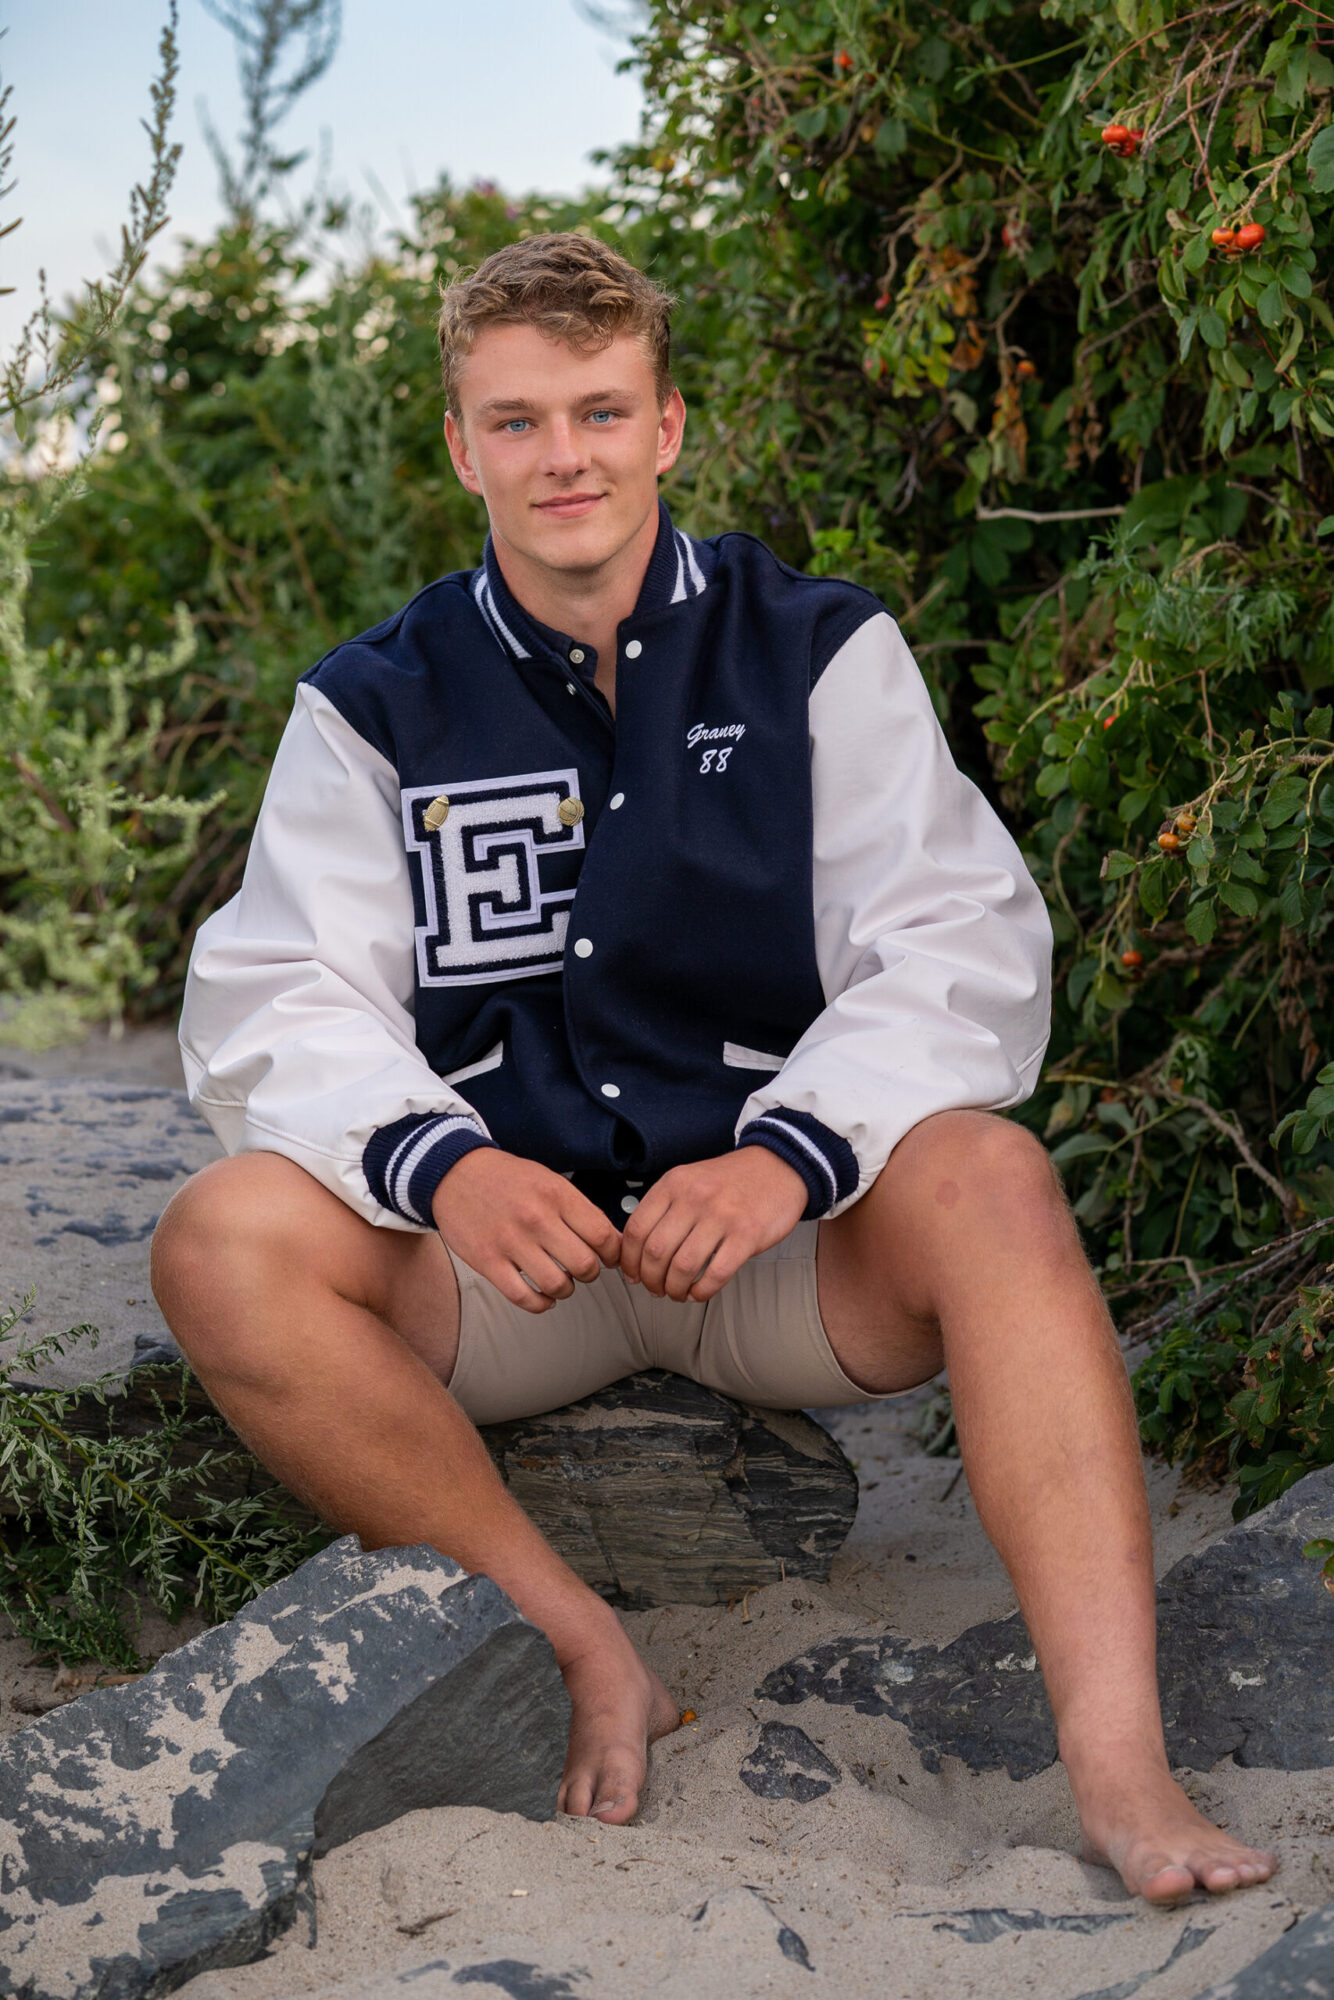 teenage boy wearing a blue and white letterman jacket with an E, smiling